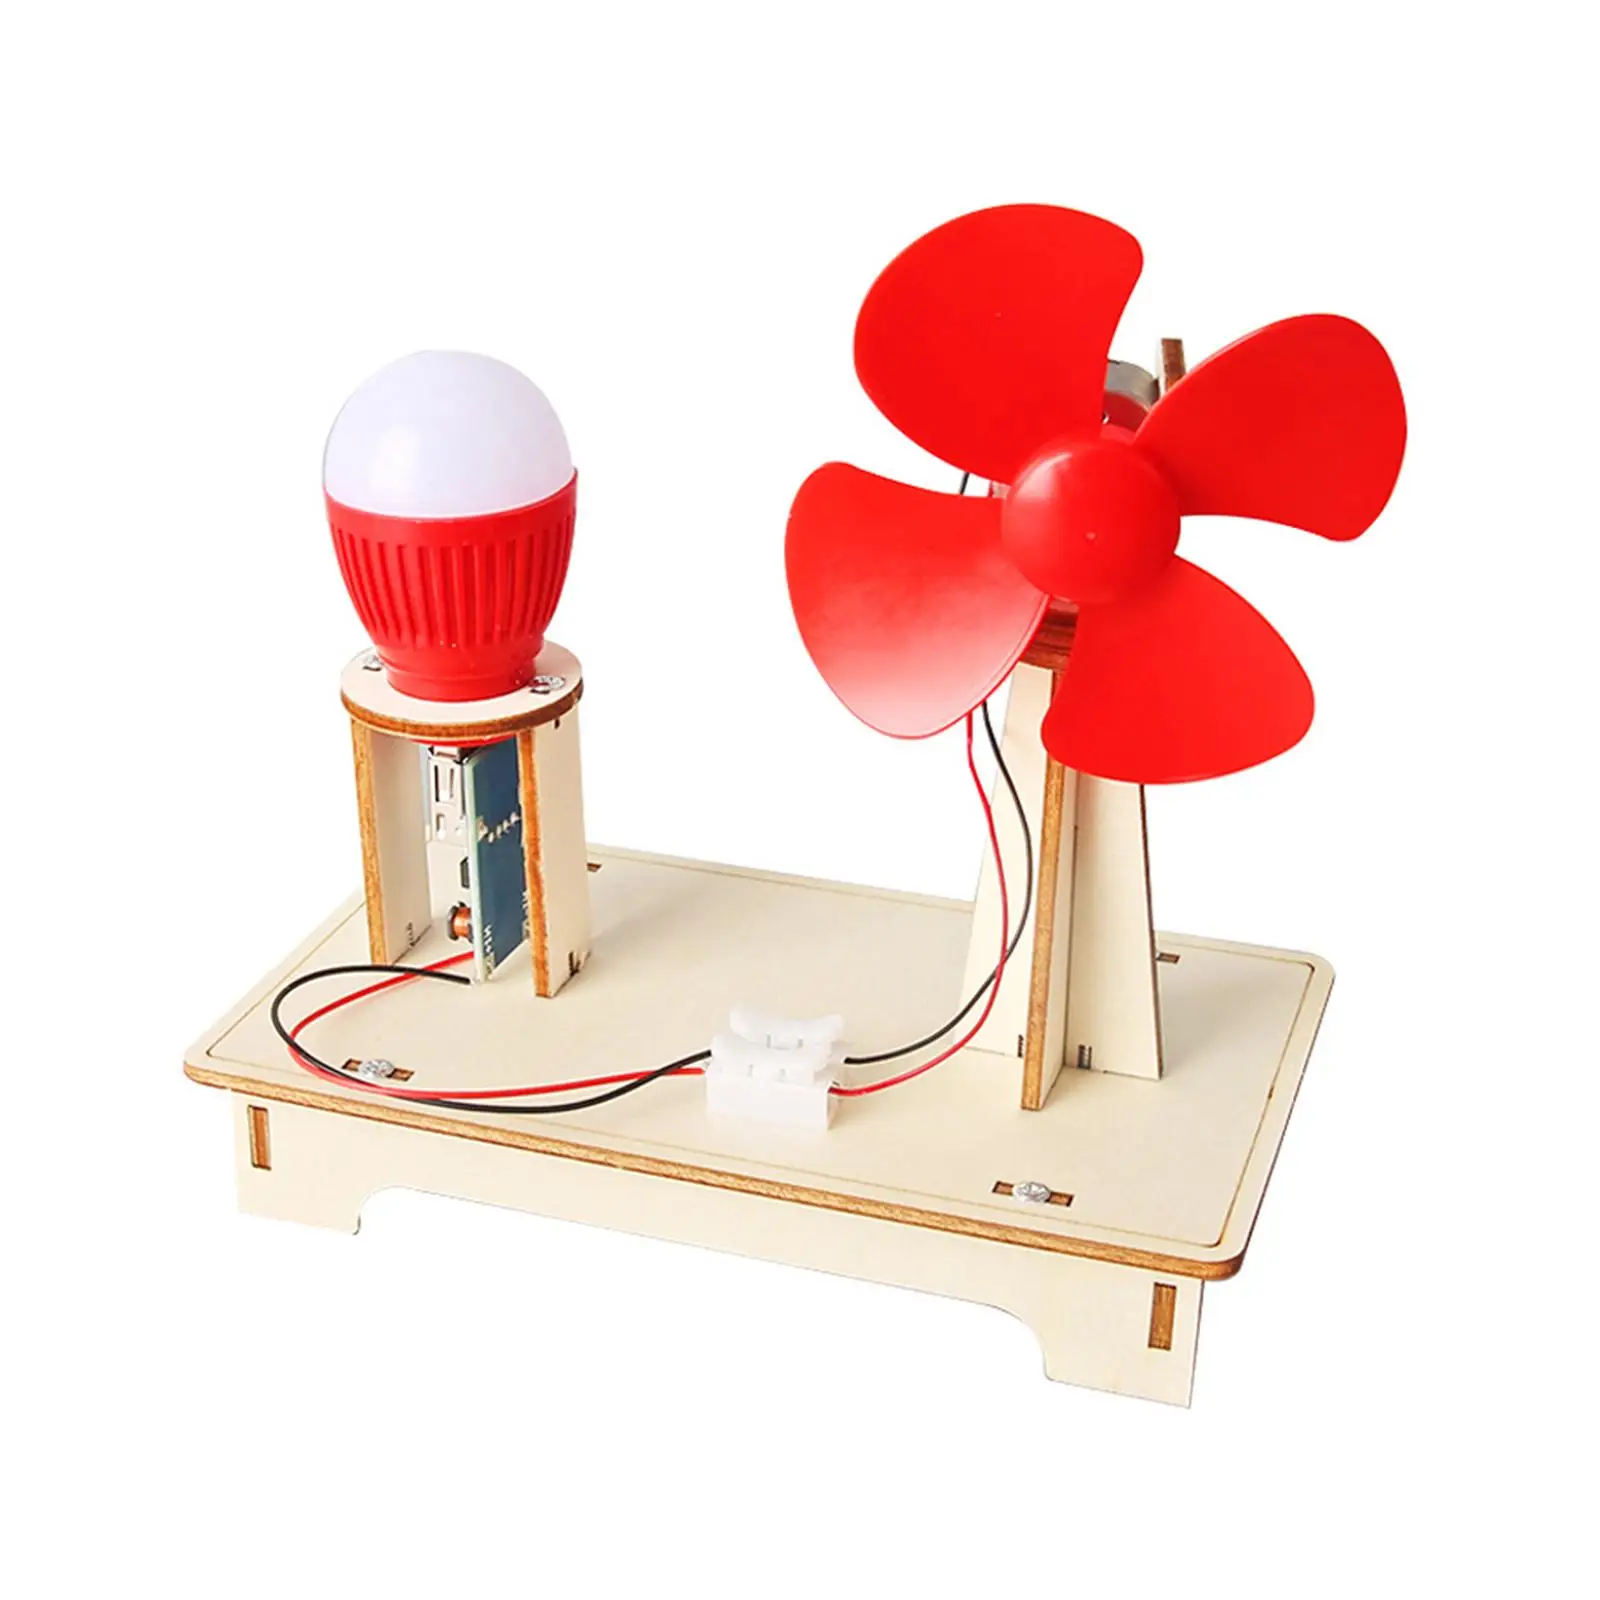 

DIY Educational Model Kit Toys Wind Turbines Science Experiment Stem Projects for Age 8 9 10 11 12 Years Old Teens Boys